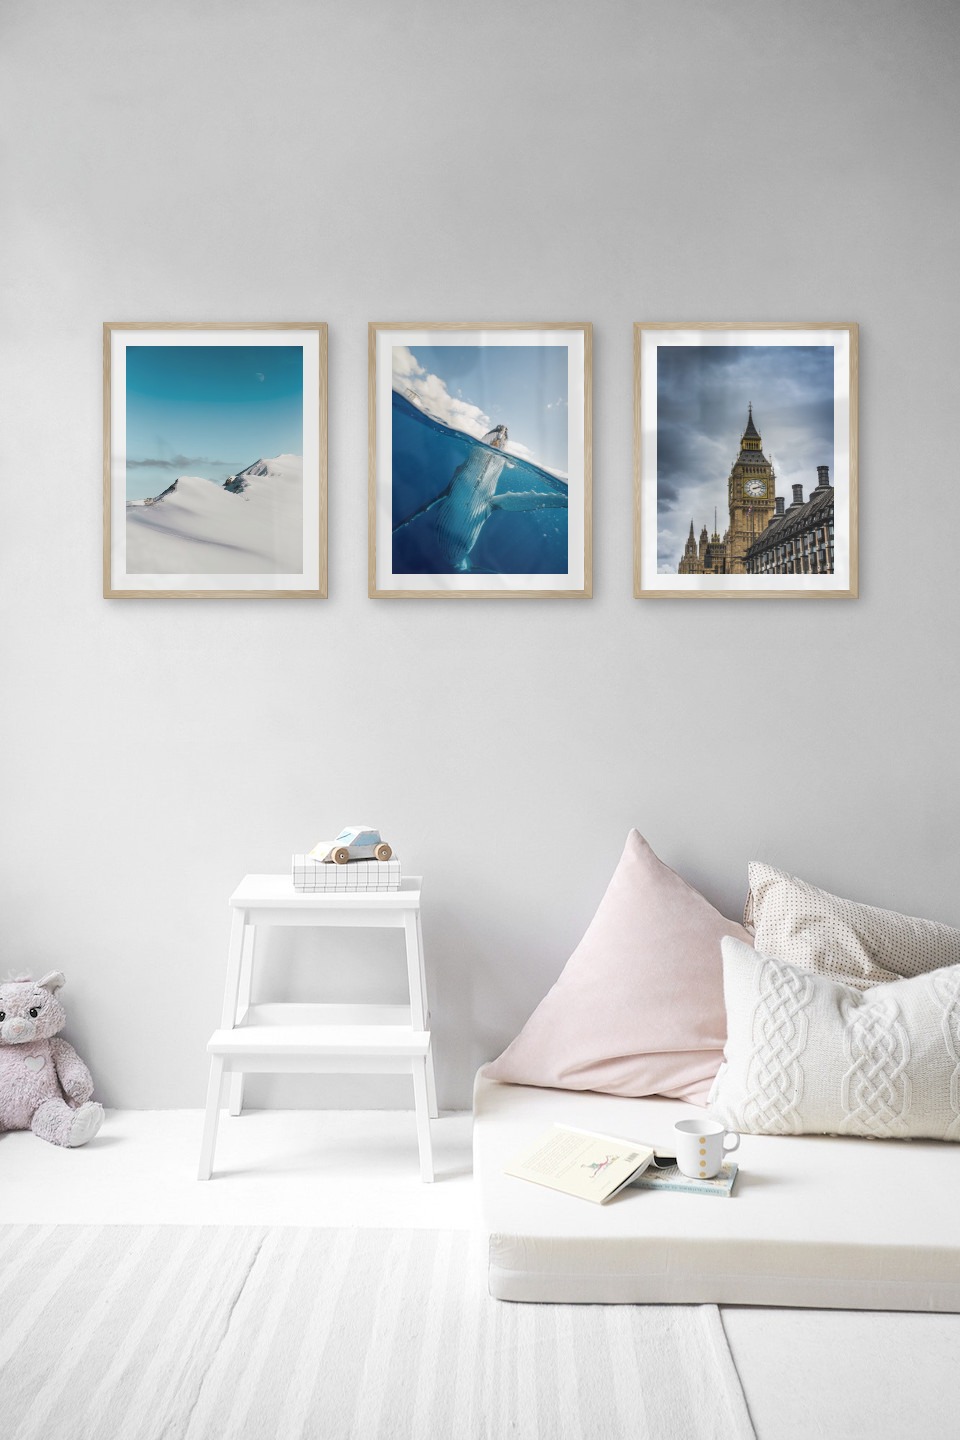 Gallery wall with picture frames in wood in sizes 40x50 with prints "Snowy mountain peaks", "Choice in the water" and "Big Ben in London"